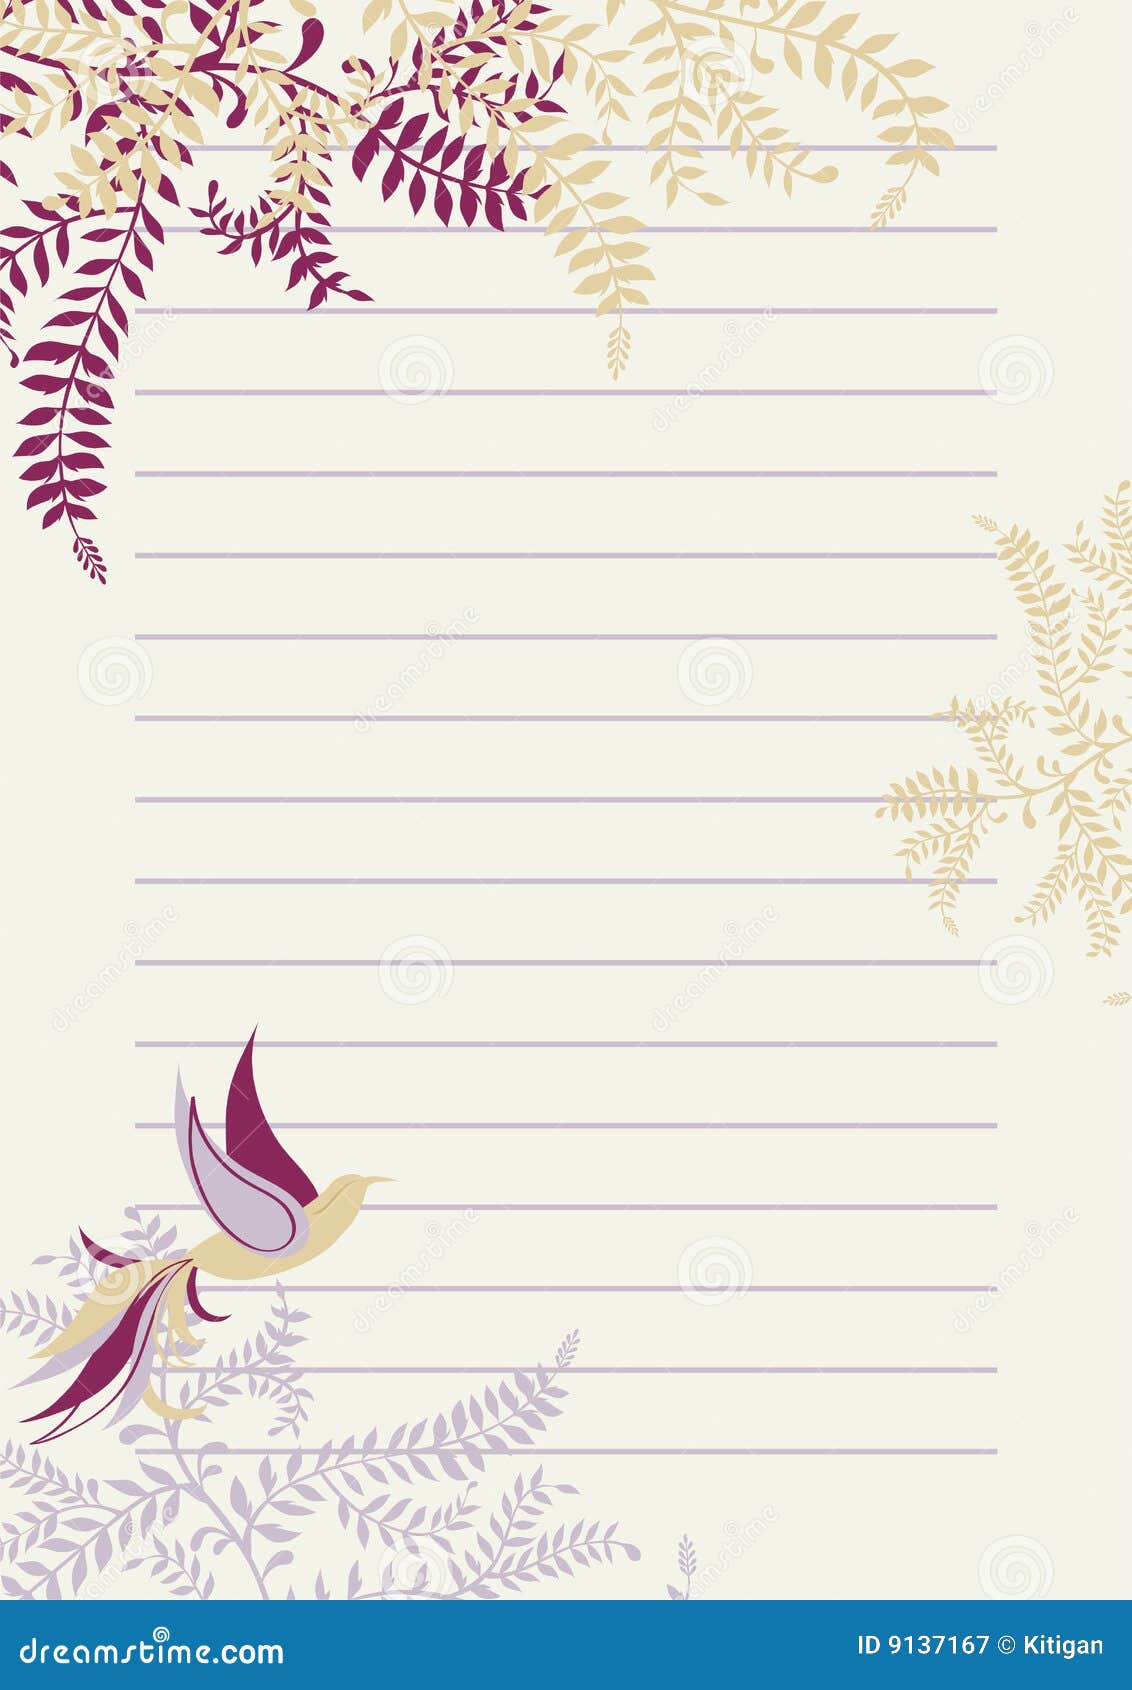 Lined Page with Decoration stock vector. Illustration of design ...